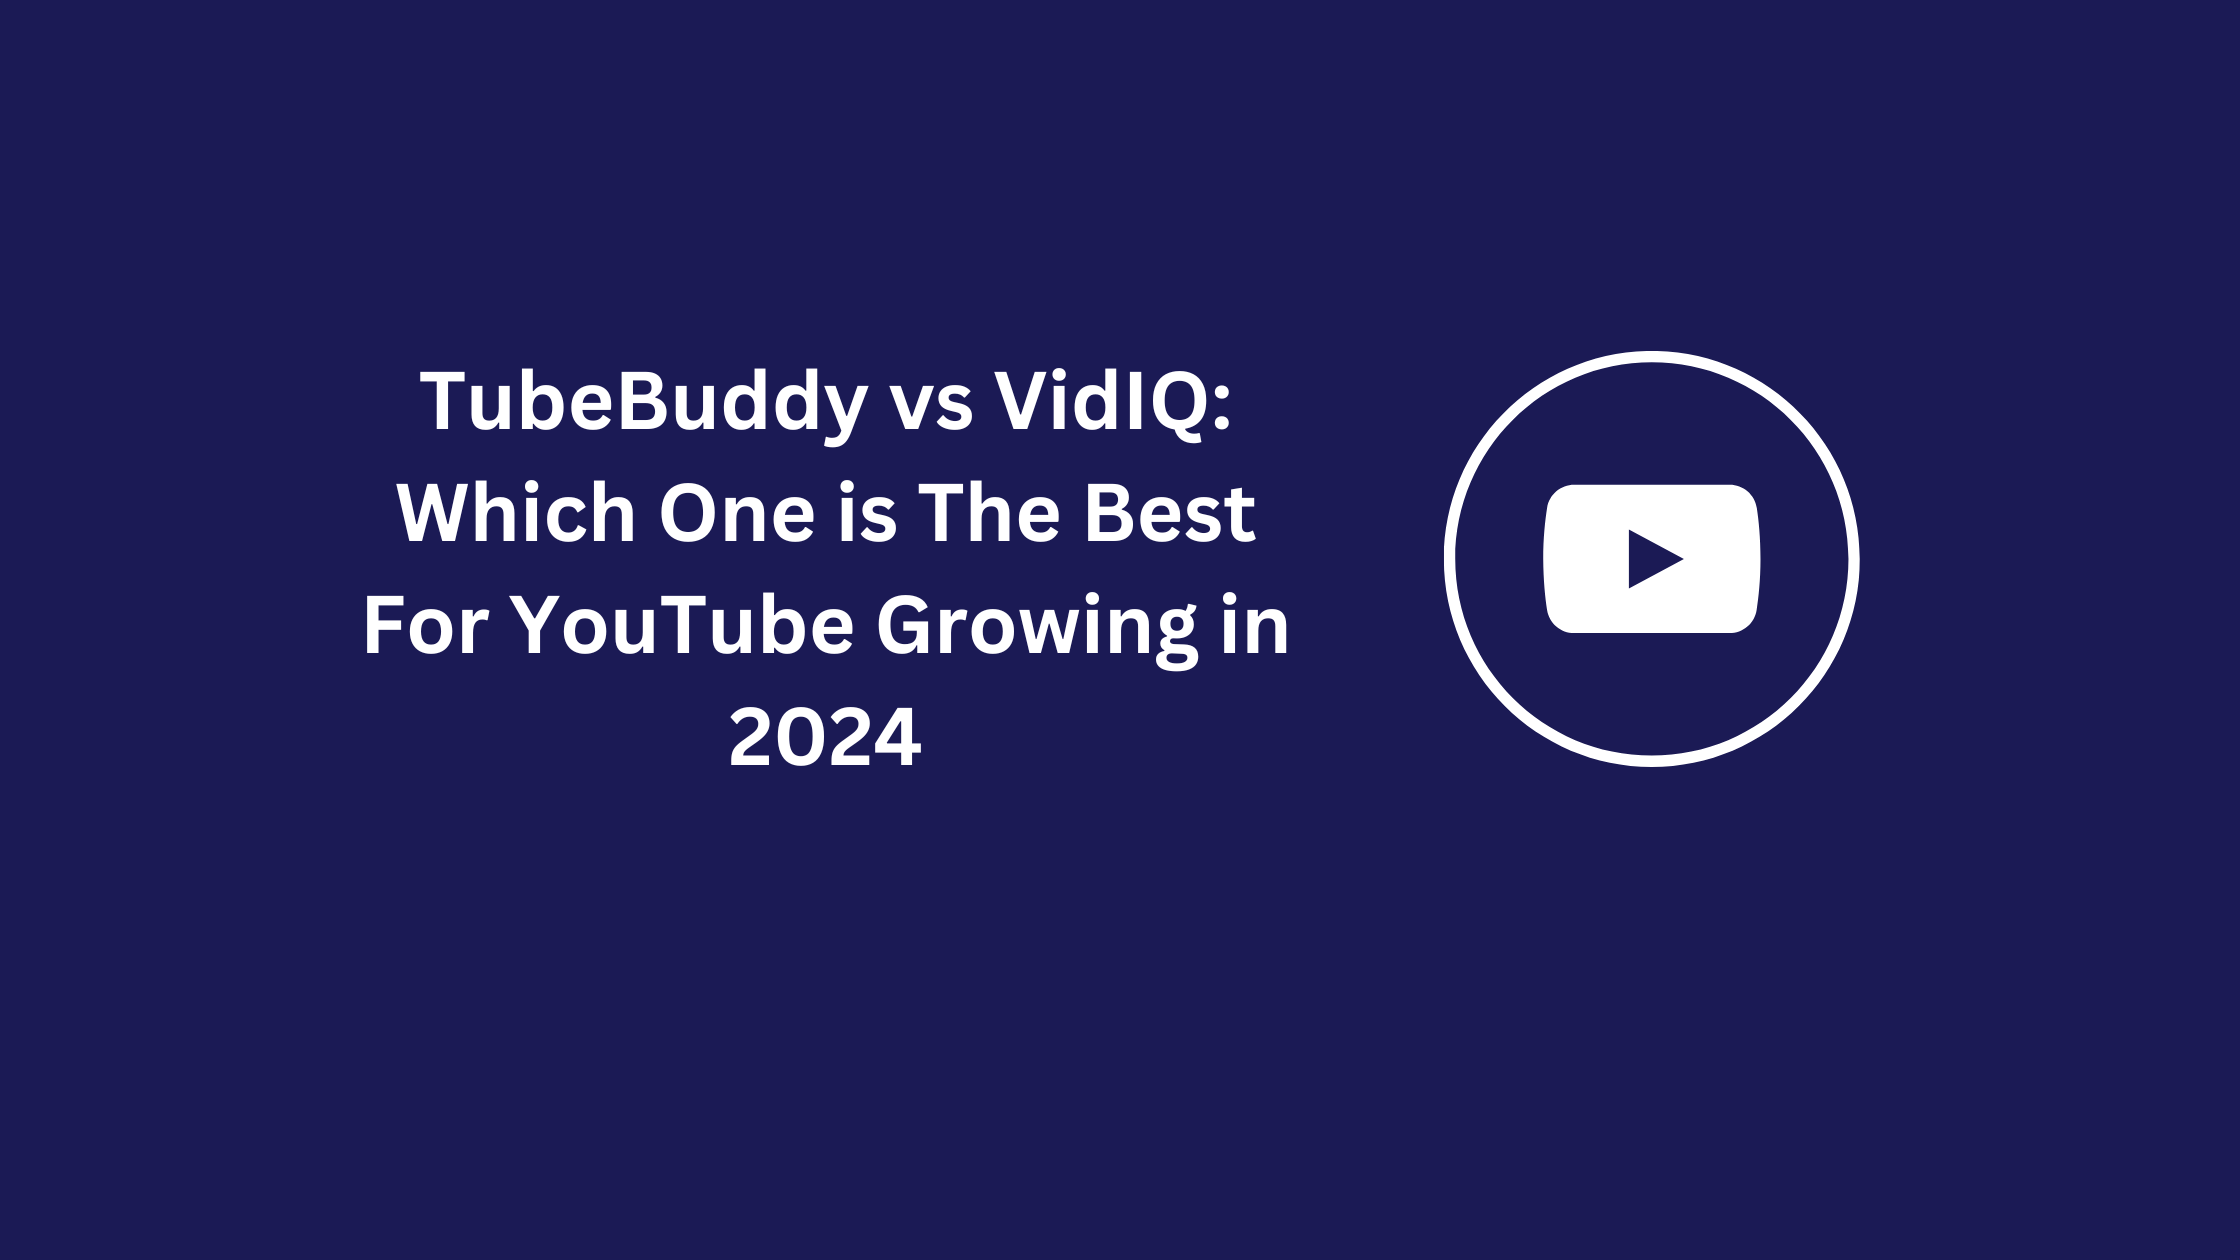 TubeBuddy vs VidIQ: Which One is The Best For YouTube Growing in 2024